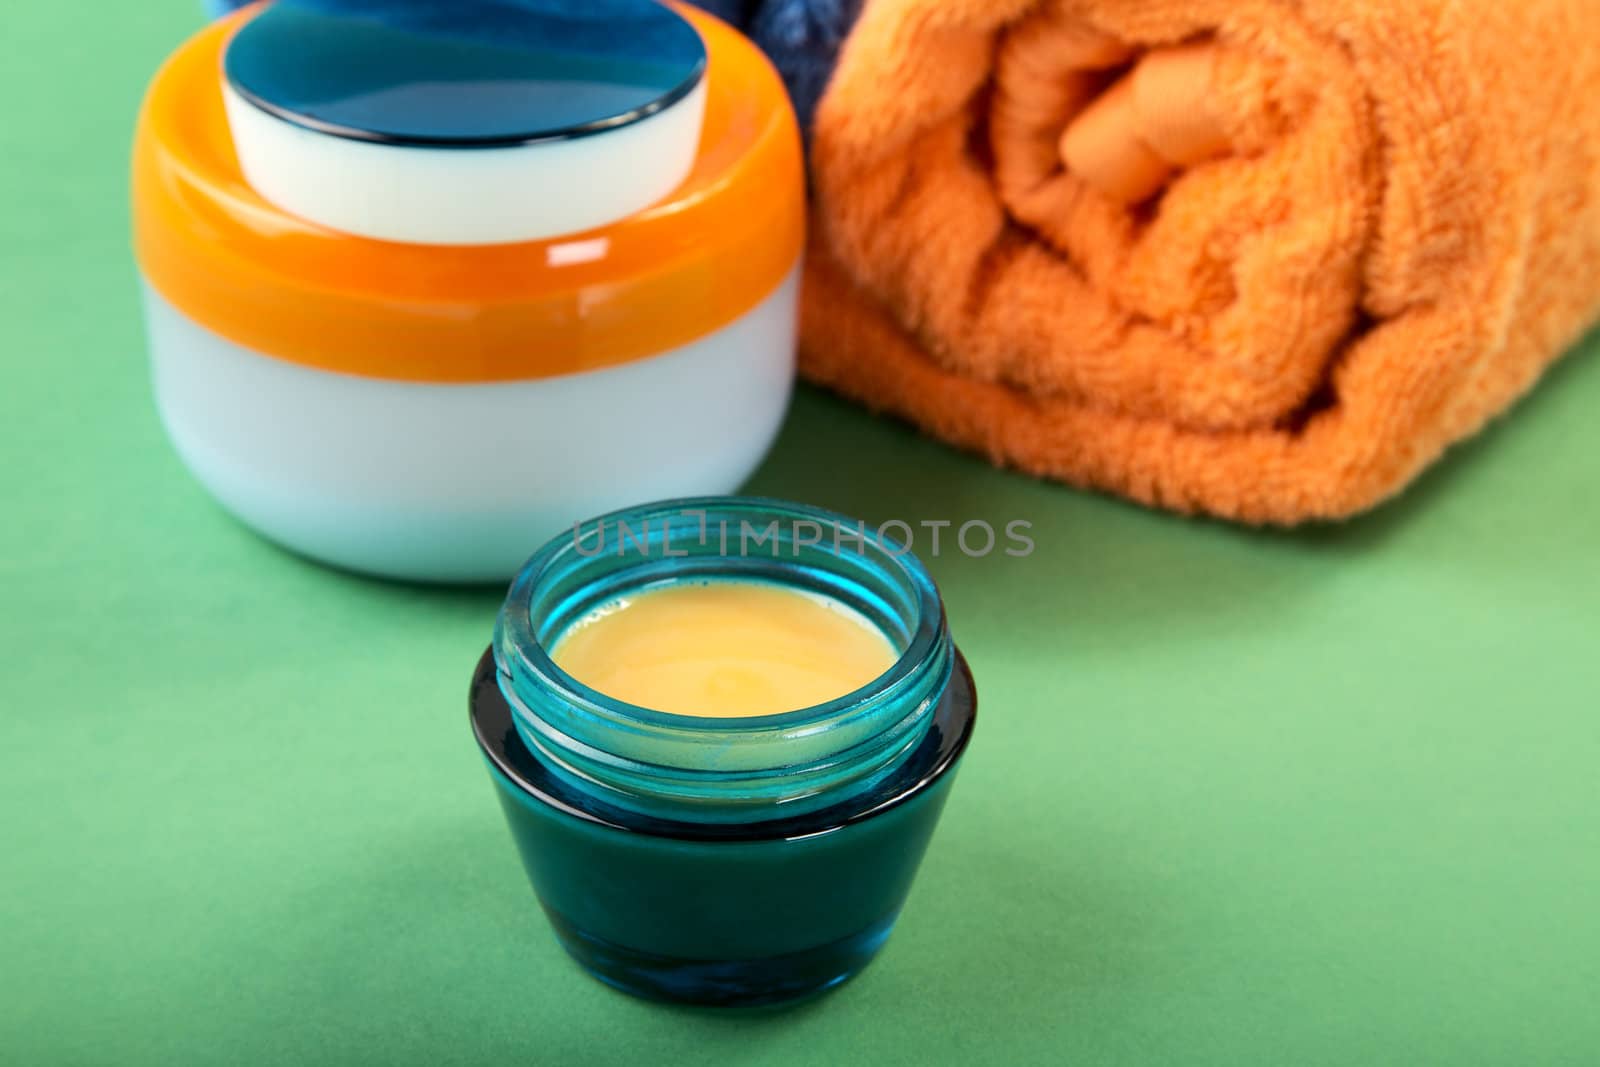 Cosmetic cream and towels on a green background